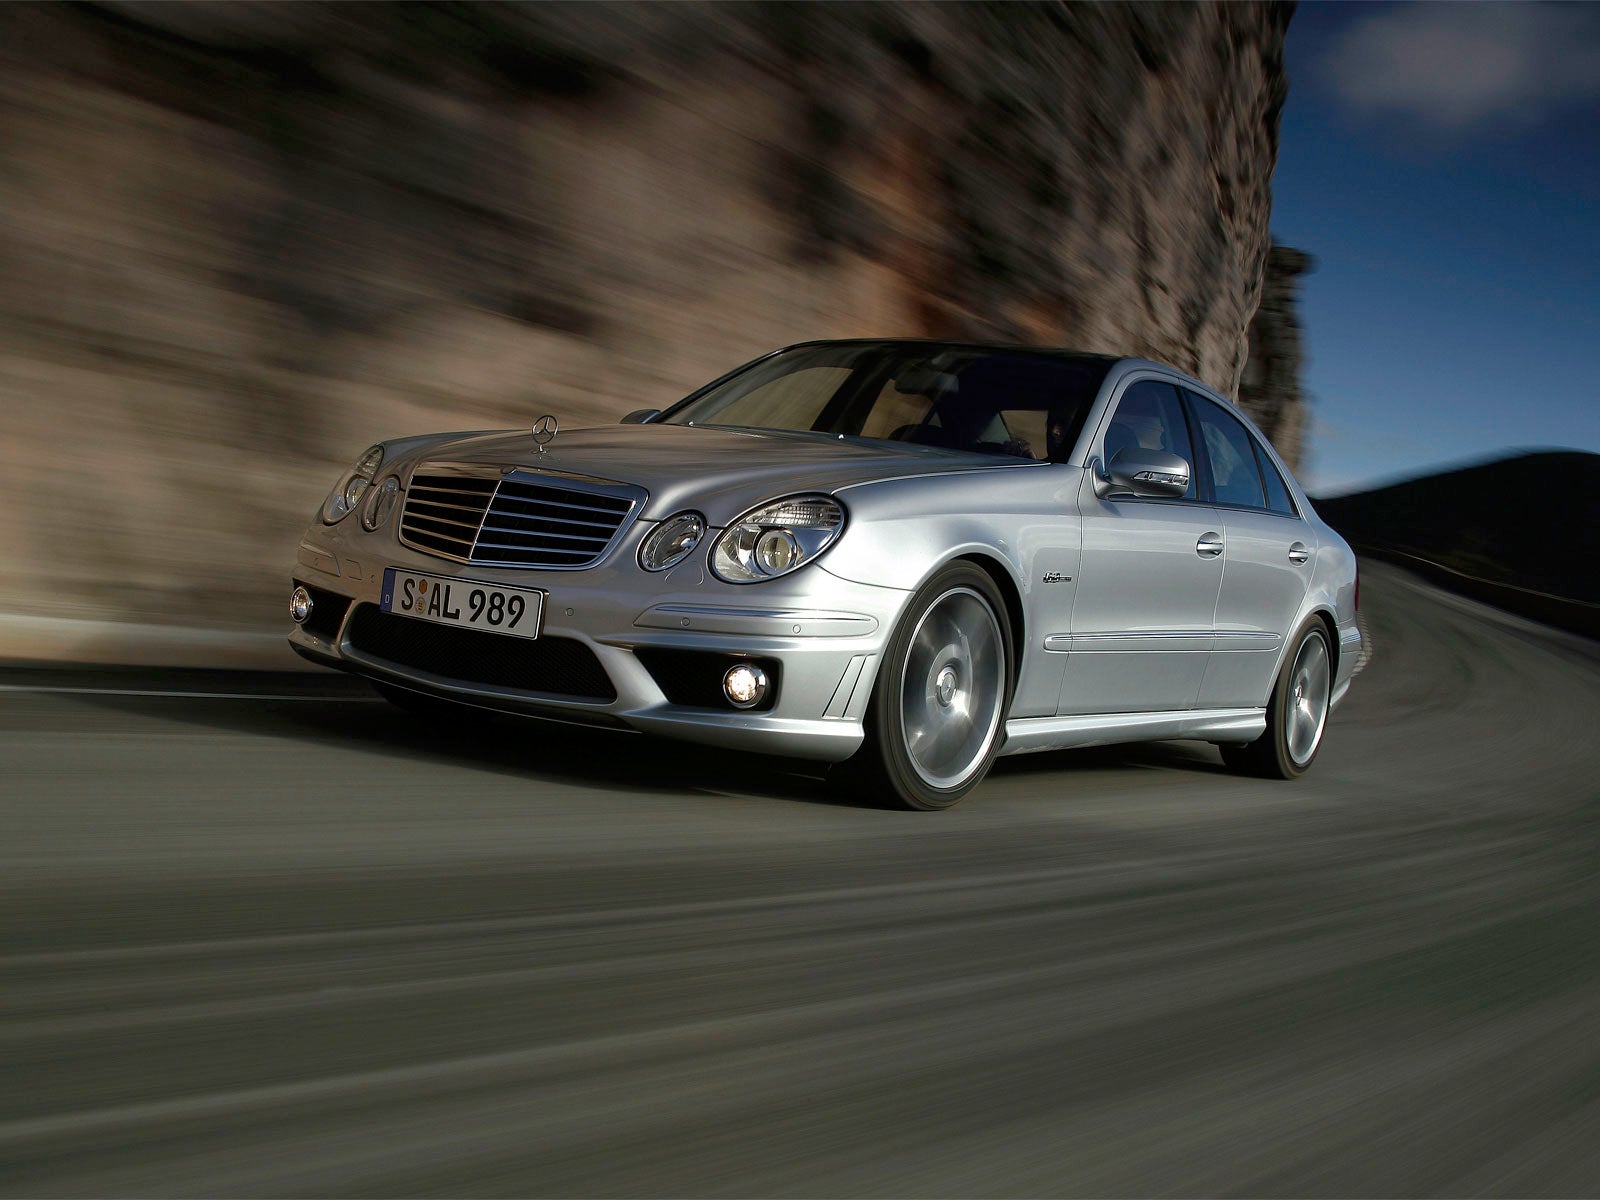 2007 Mercedes-Benz E-Class - Other Pictures - CarGurus